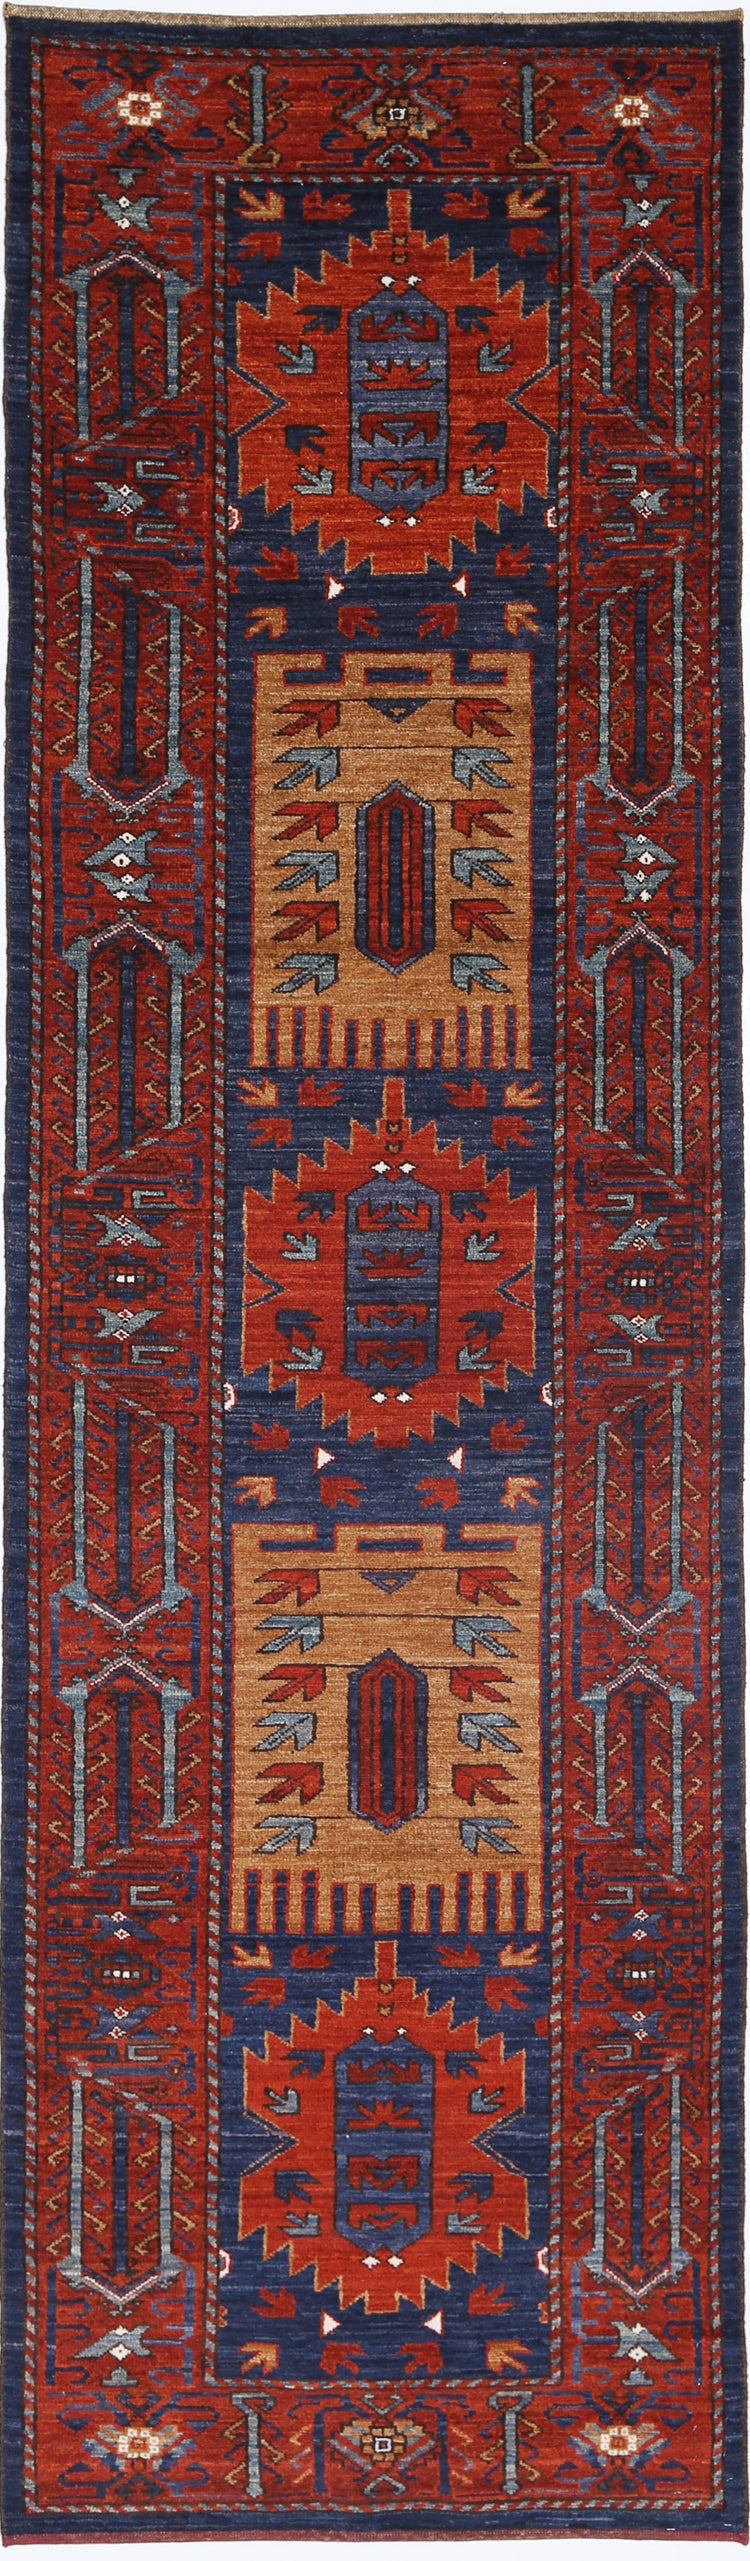 Tribal Hand Knotted Humna Humna Wool Rug of Size 2'9'' X 10'7'' in Blue and Rust Colors - Made in Afghanistan